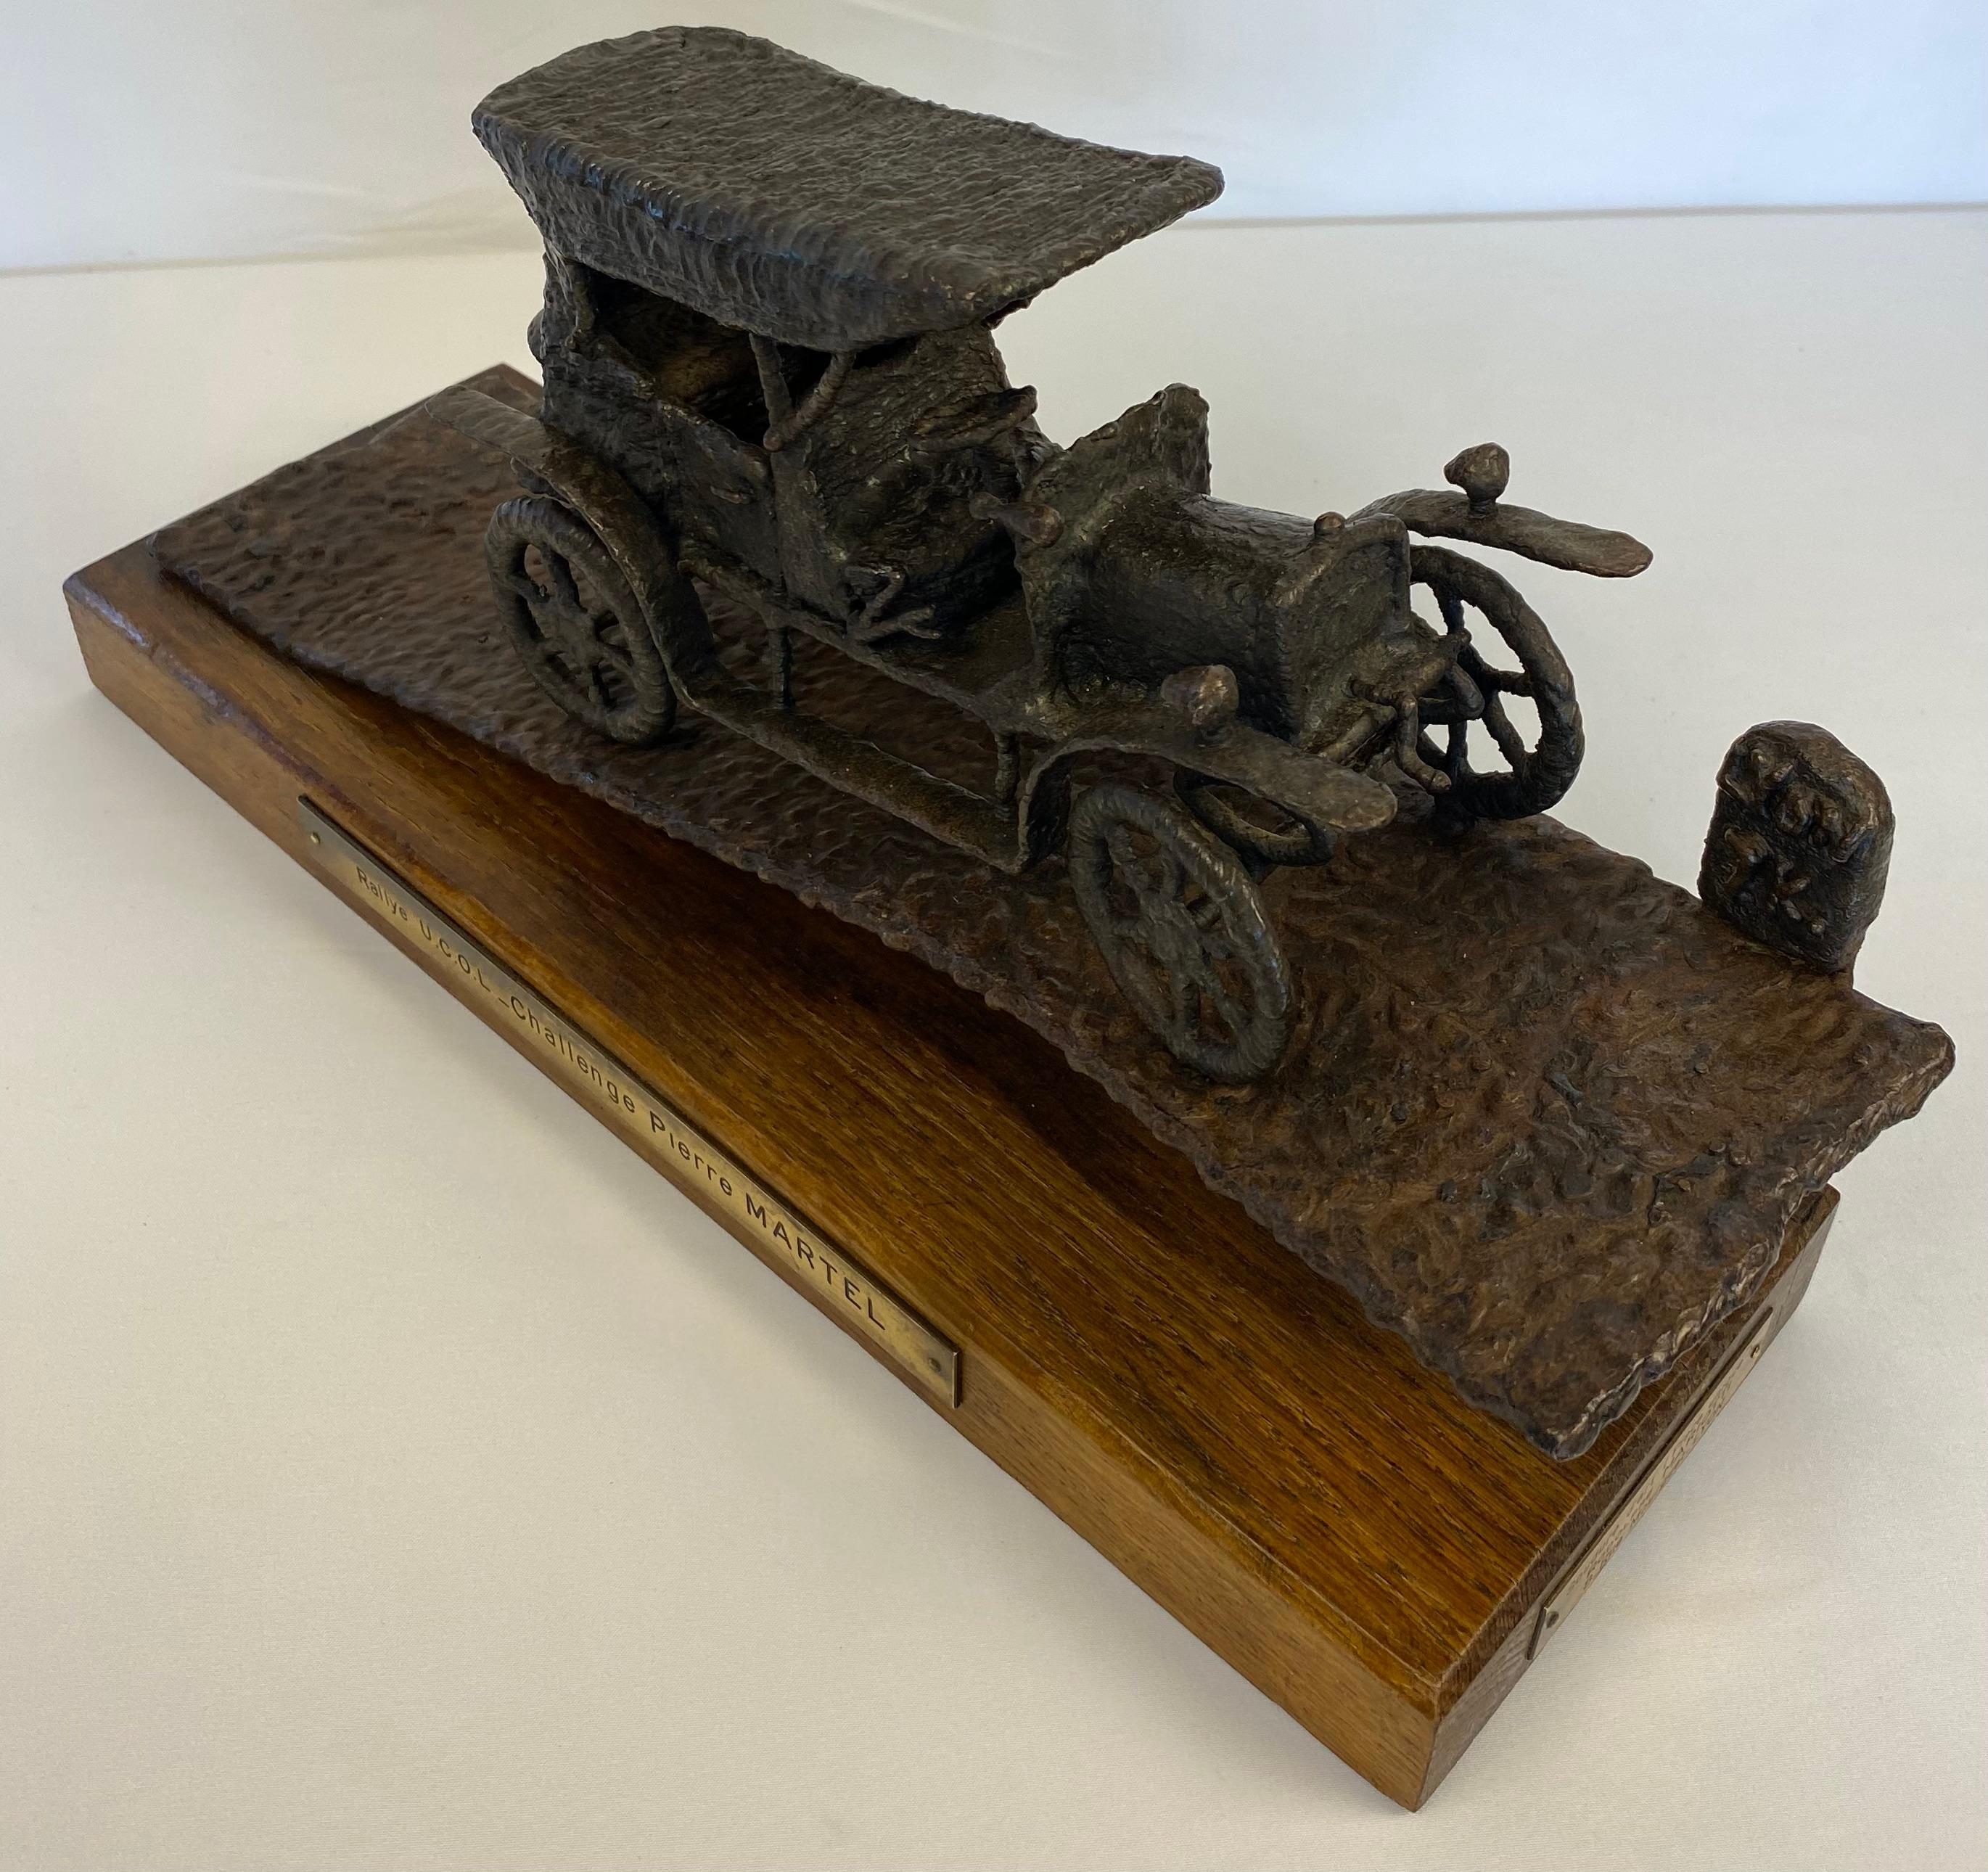 Hand-Crafted French Rally Cast Iron Trophy Car by Artist Rodolphe Mariotti  For Sale